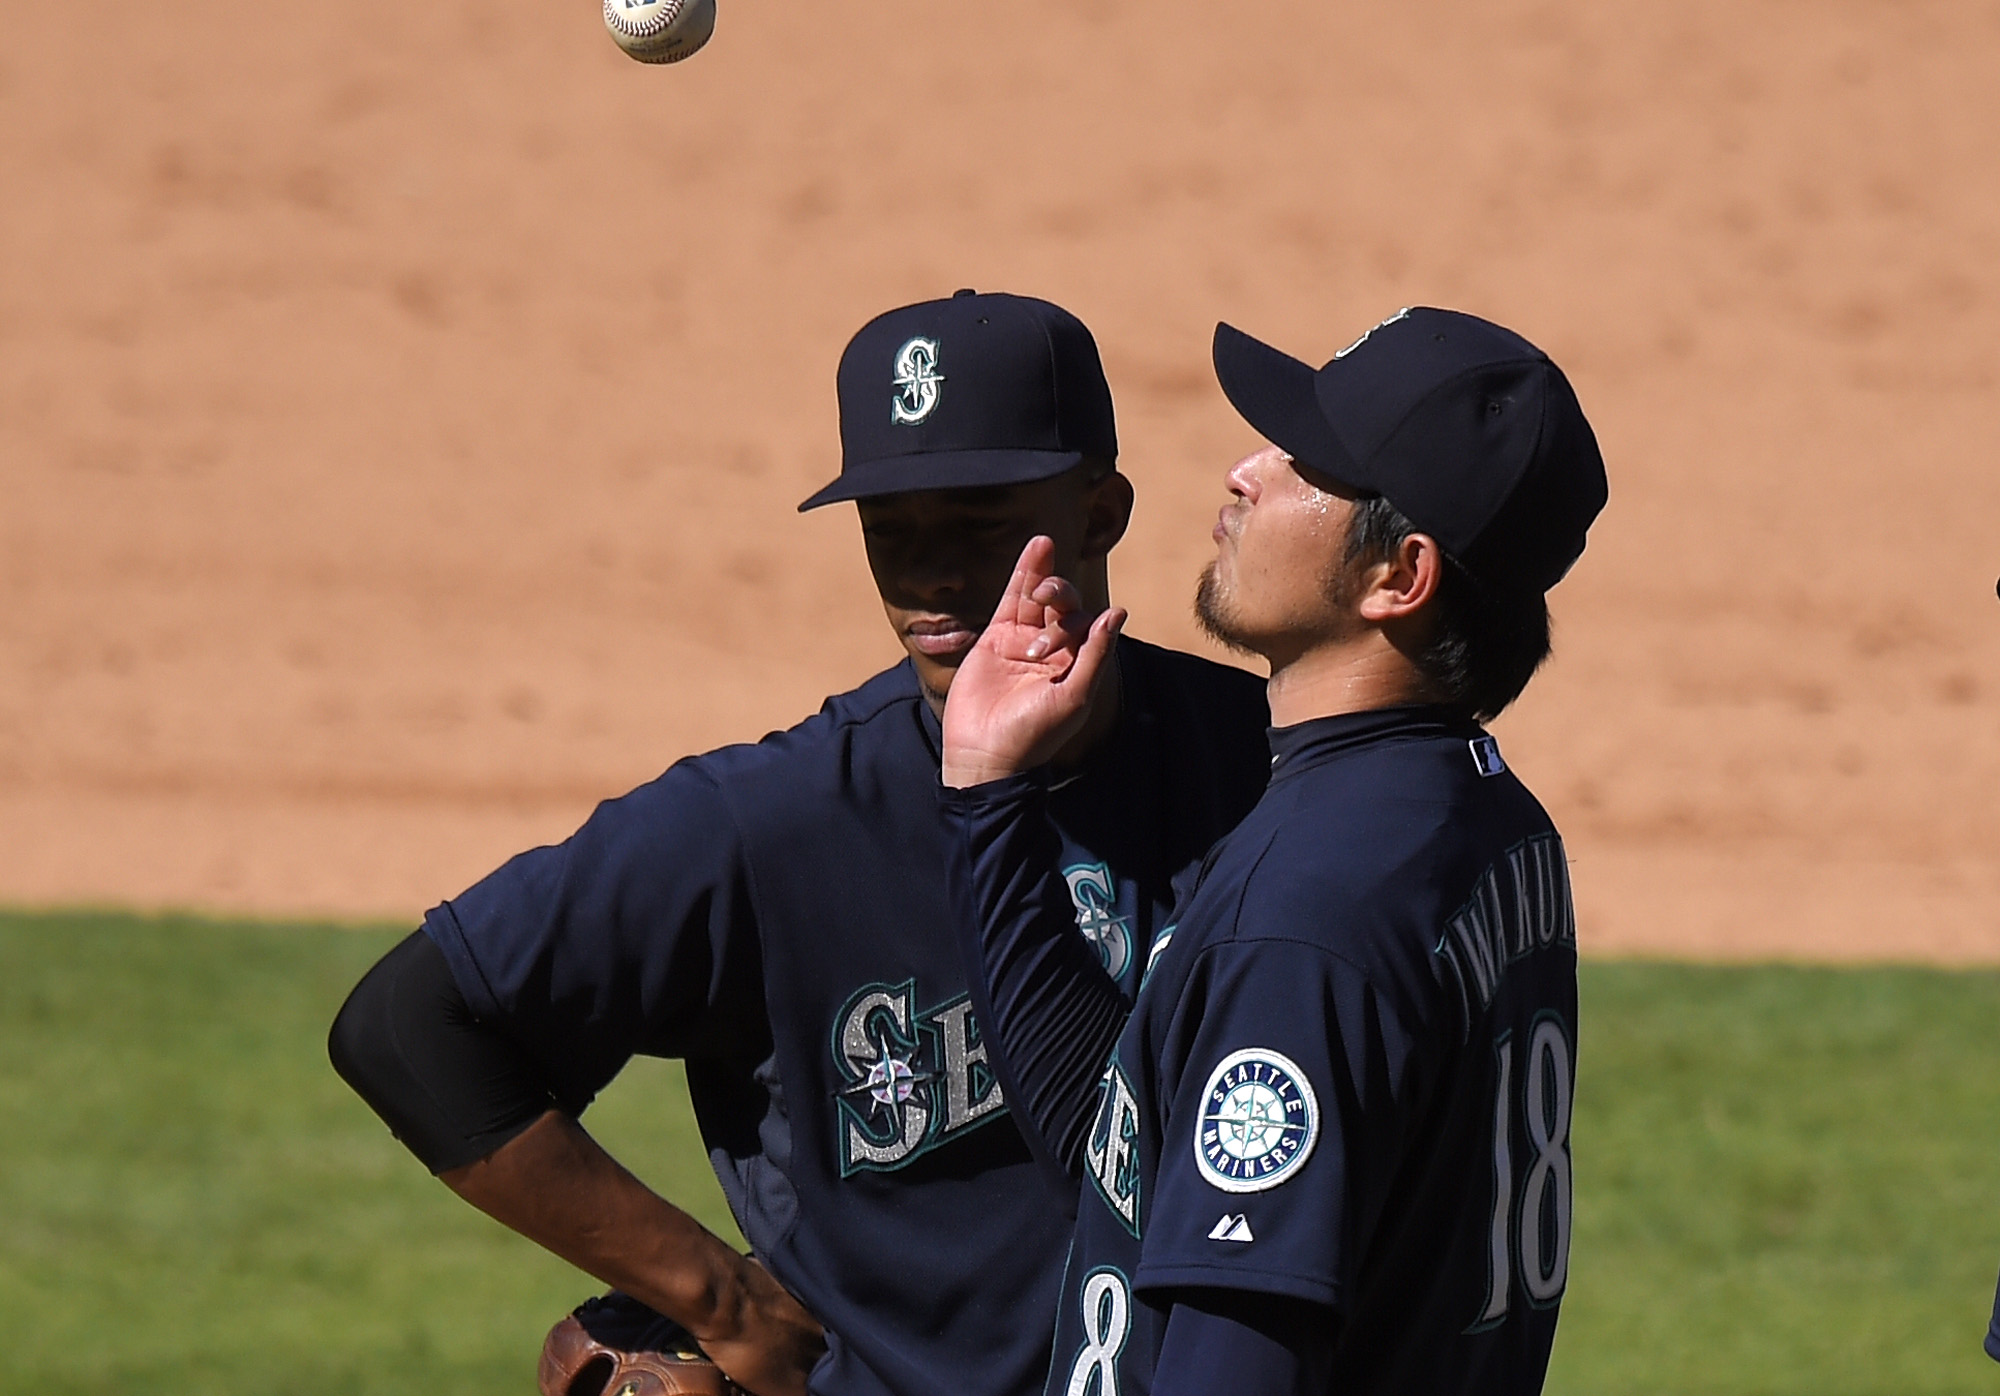 Seattle Mariners starting pitcher Hisashi Iwakuma tosses the ball in the air as he waits to be taken out of the game as shortstop Ketel Marte watches during the eighth inning against the Los Angeles Angels, Sunday, Sept. 27, 2015, in Anaheim, Calif. (AP Photo/Mark J.